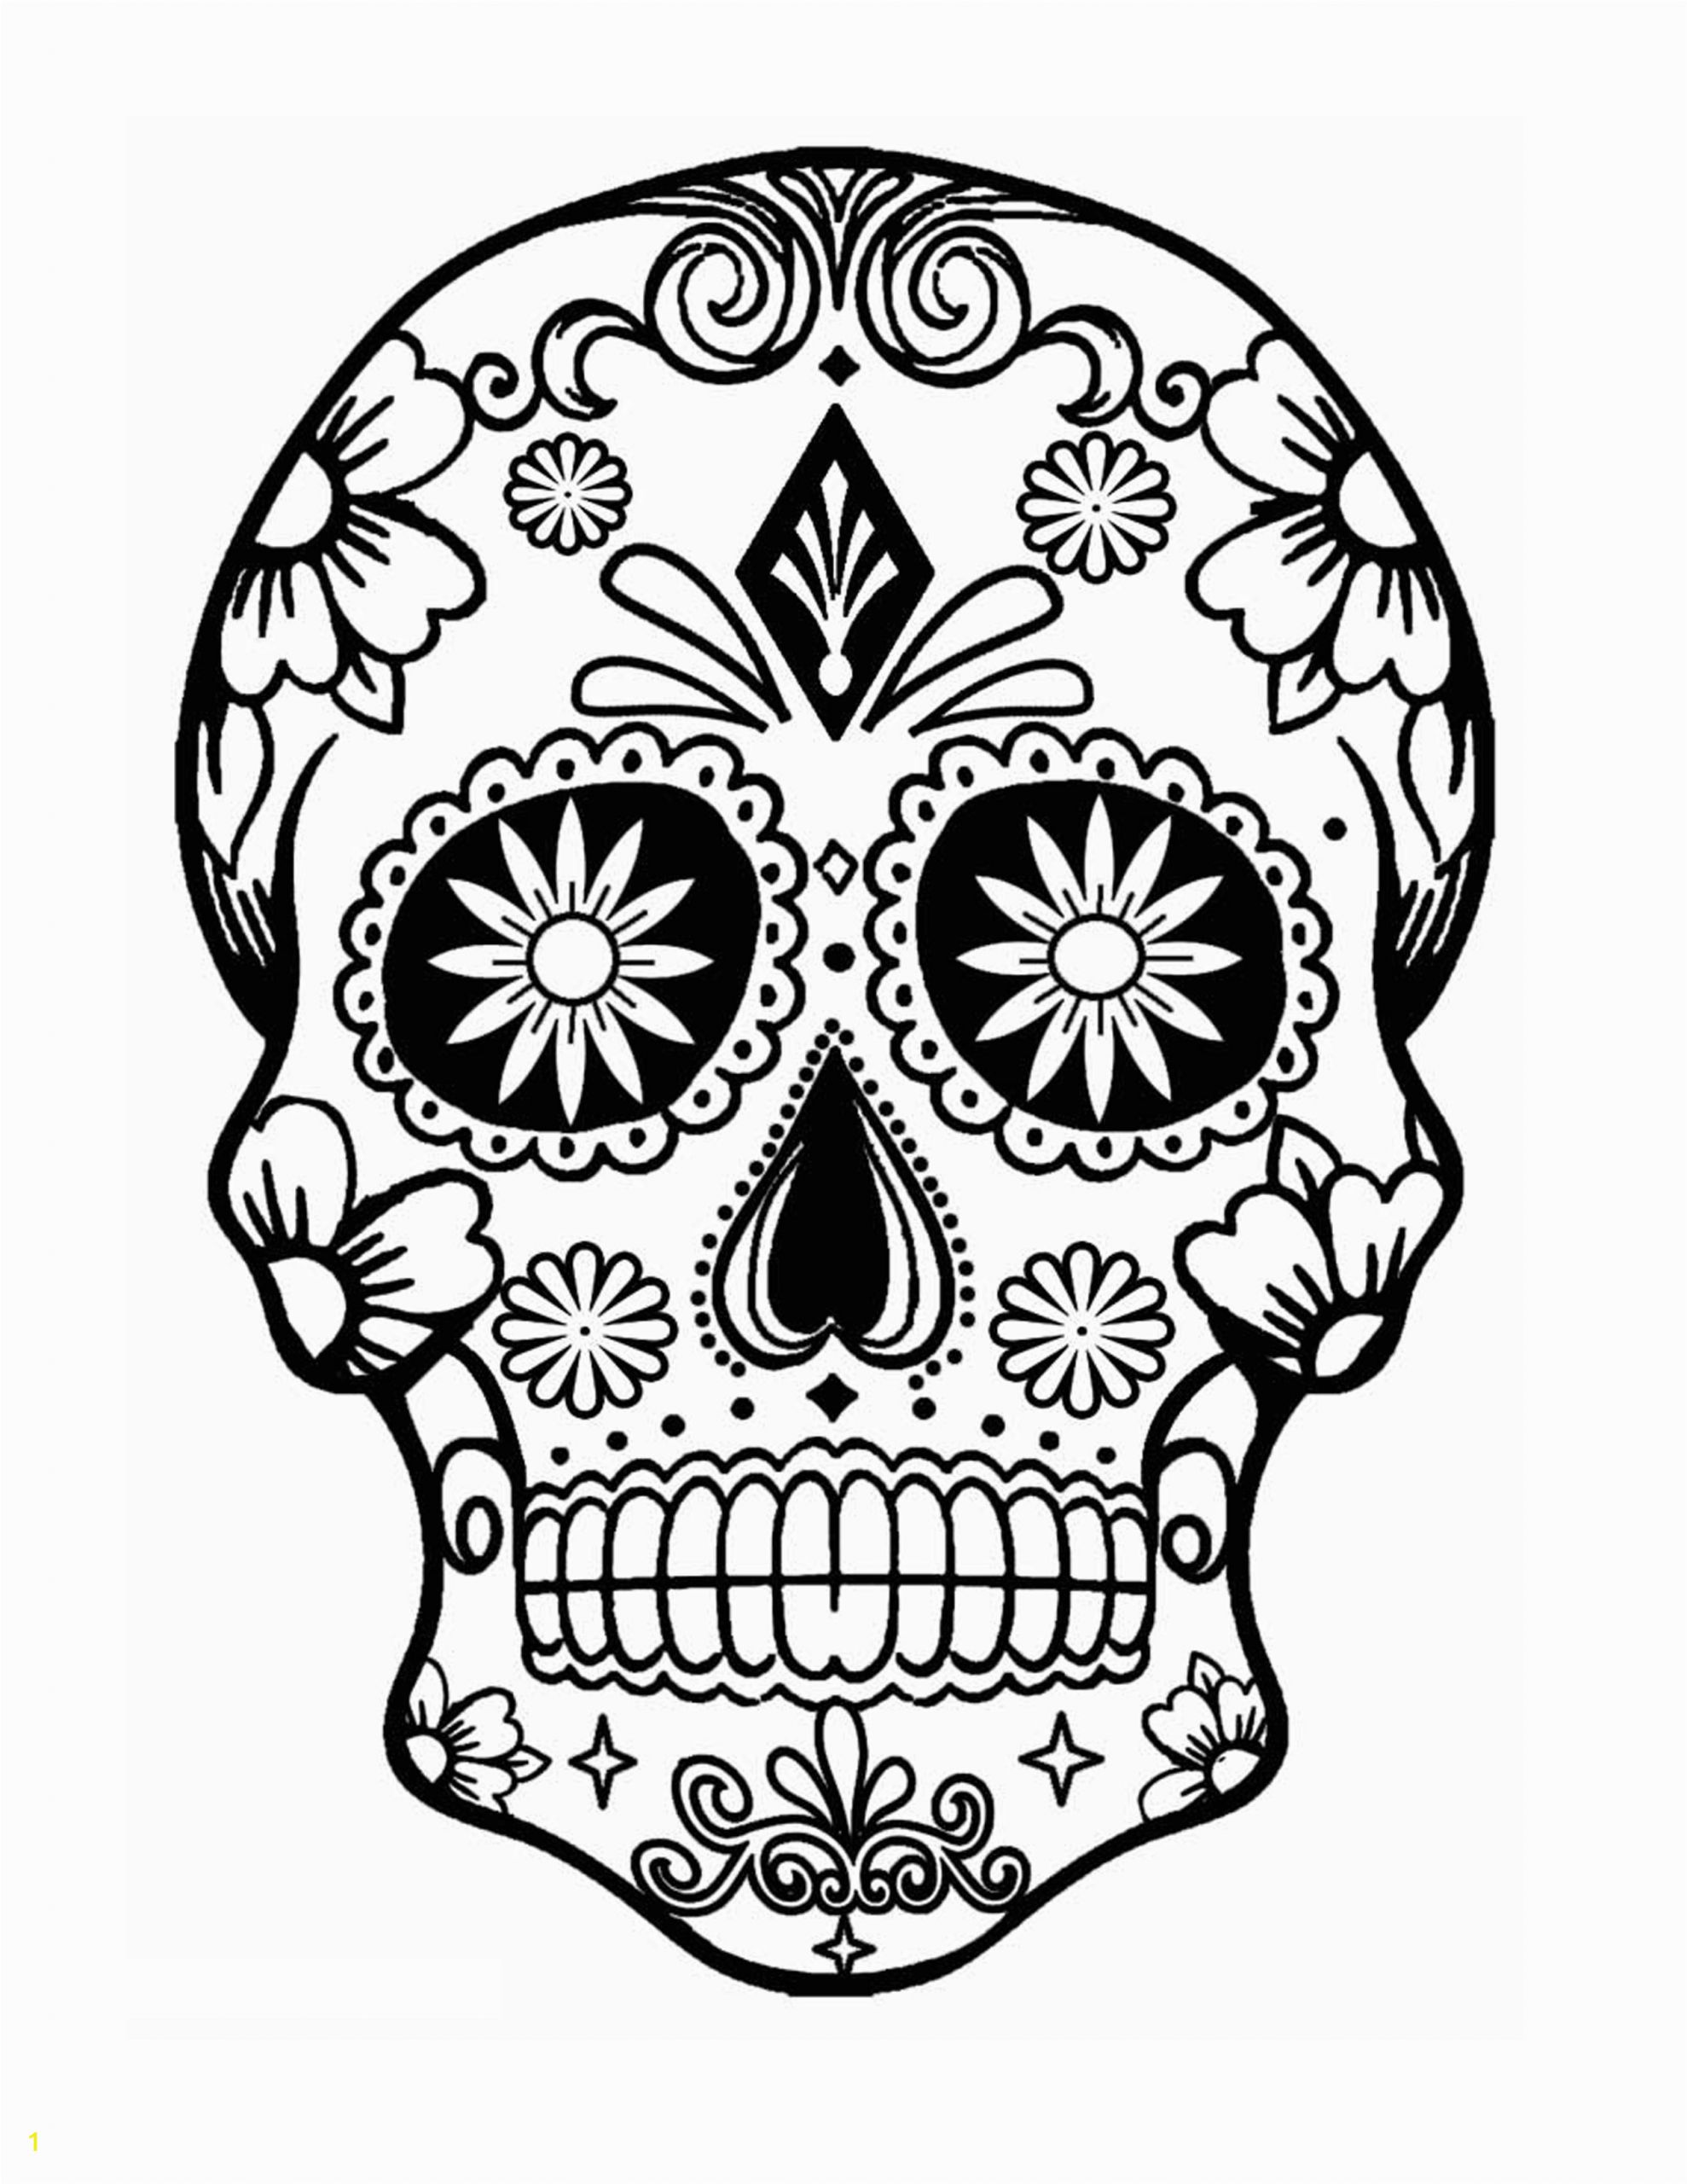 Sugar Skull Coloring Pages for Adults Sugar Skull Coloring Page with Images